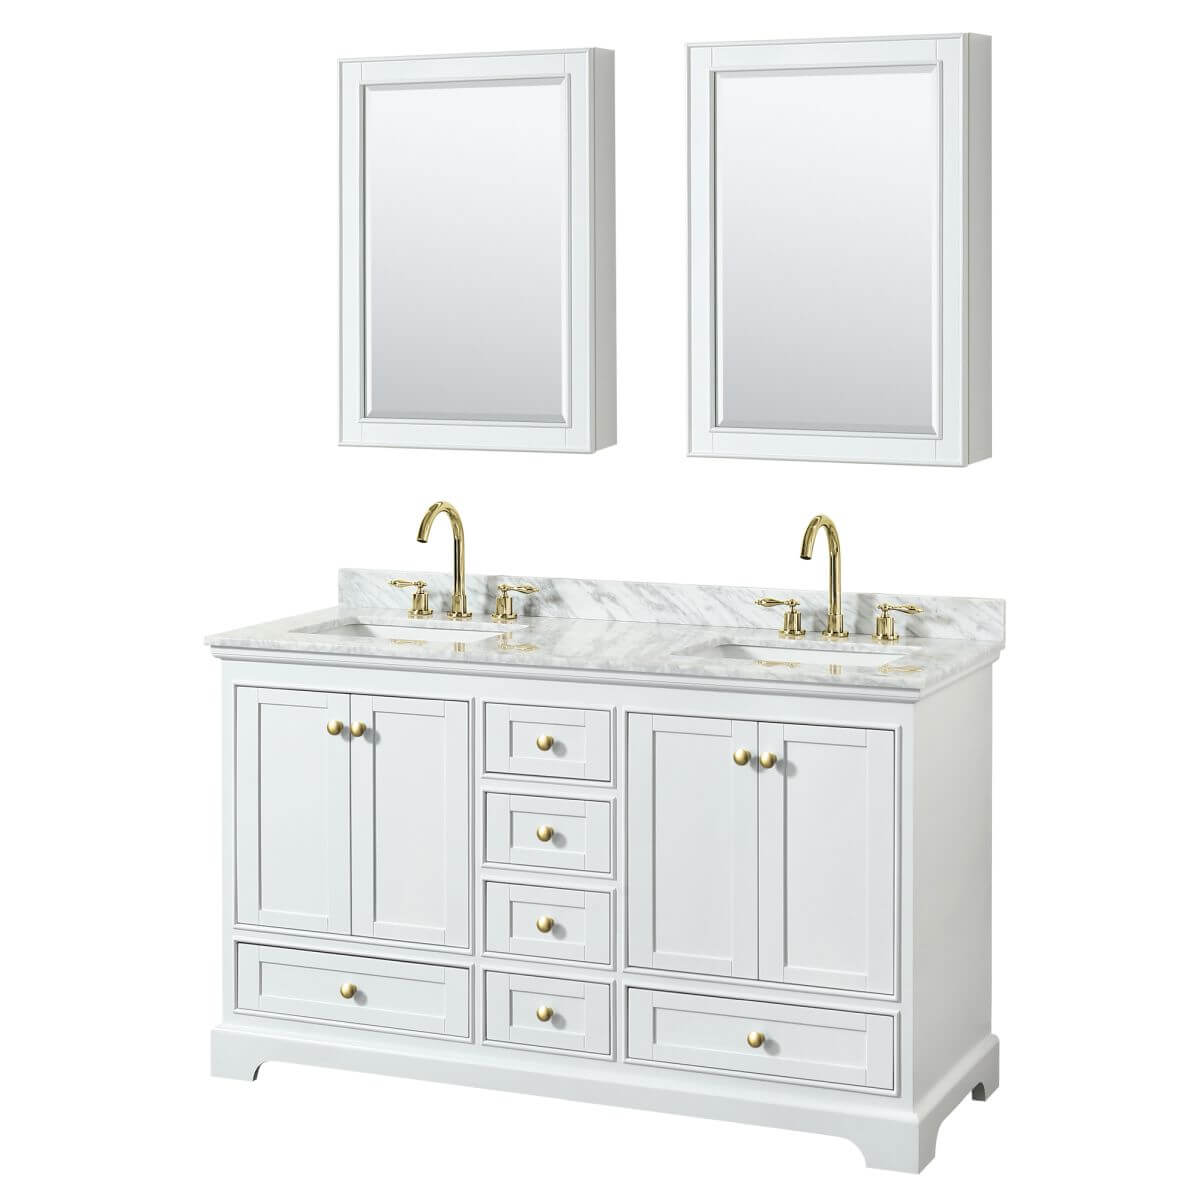 Wyndham Collection Deborah 60 inch Double Bathroom Vanity in White with White Carrara Marble Countertop, Undermount Square Sinks, Brushed Gold Trim and Medicine Cabinets - WCS202060DWGCMUNSMED